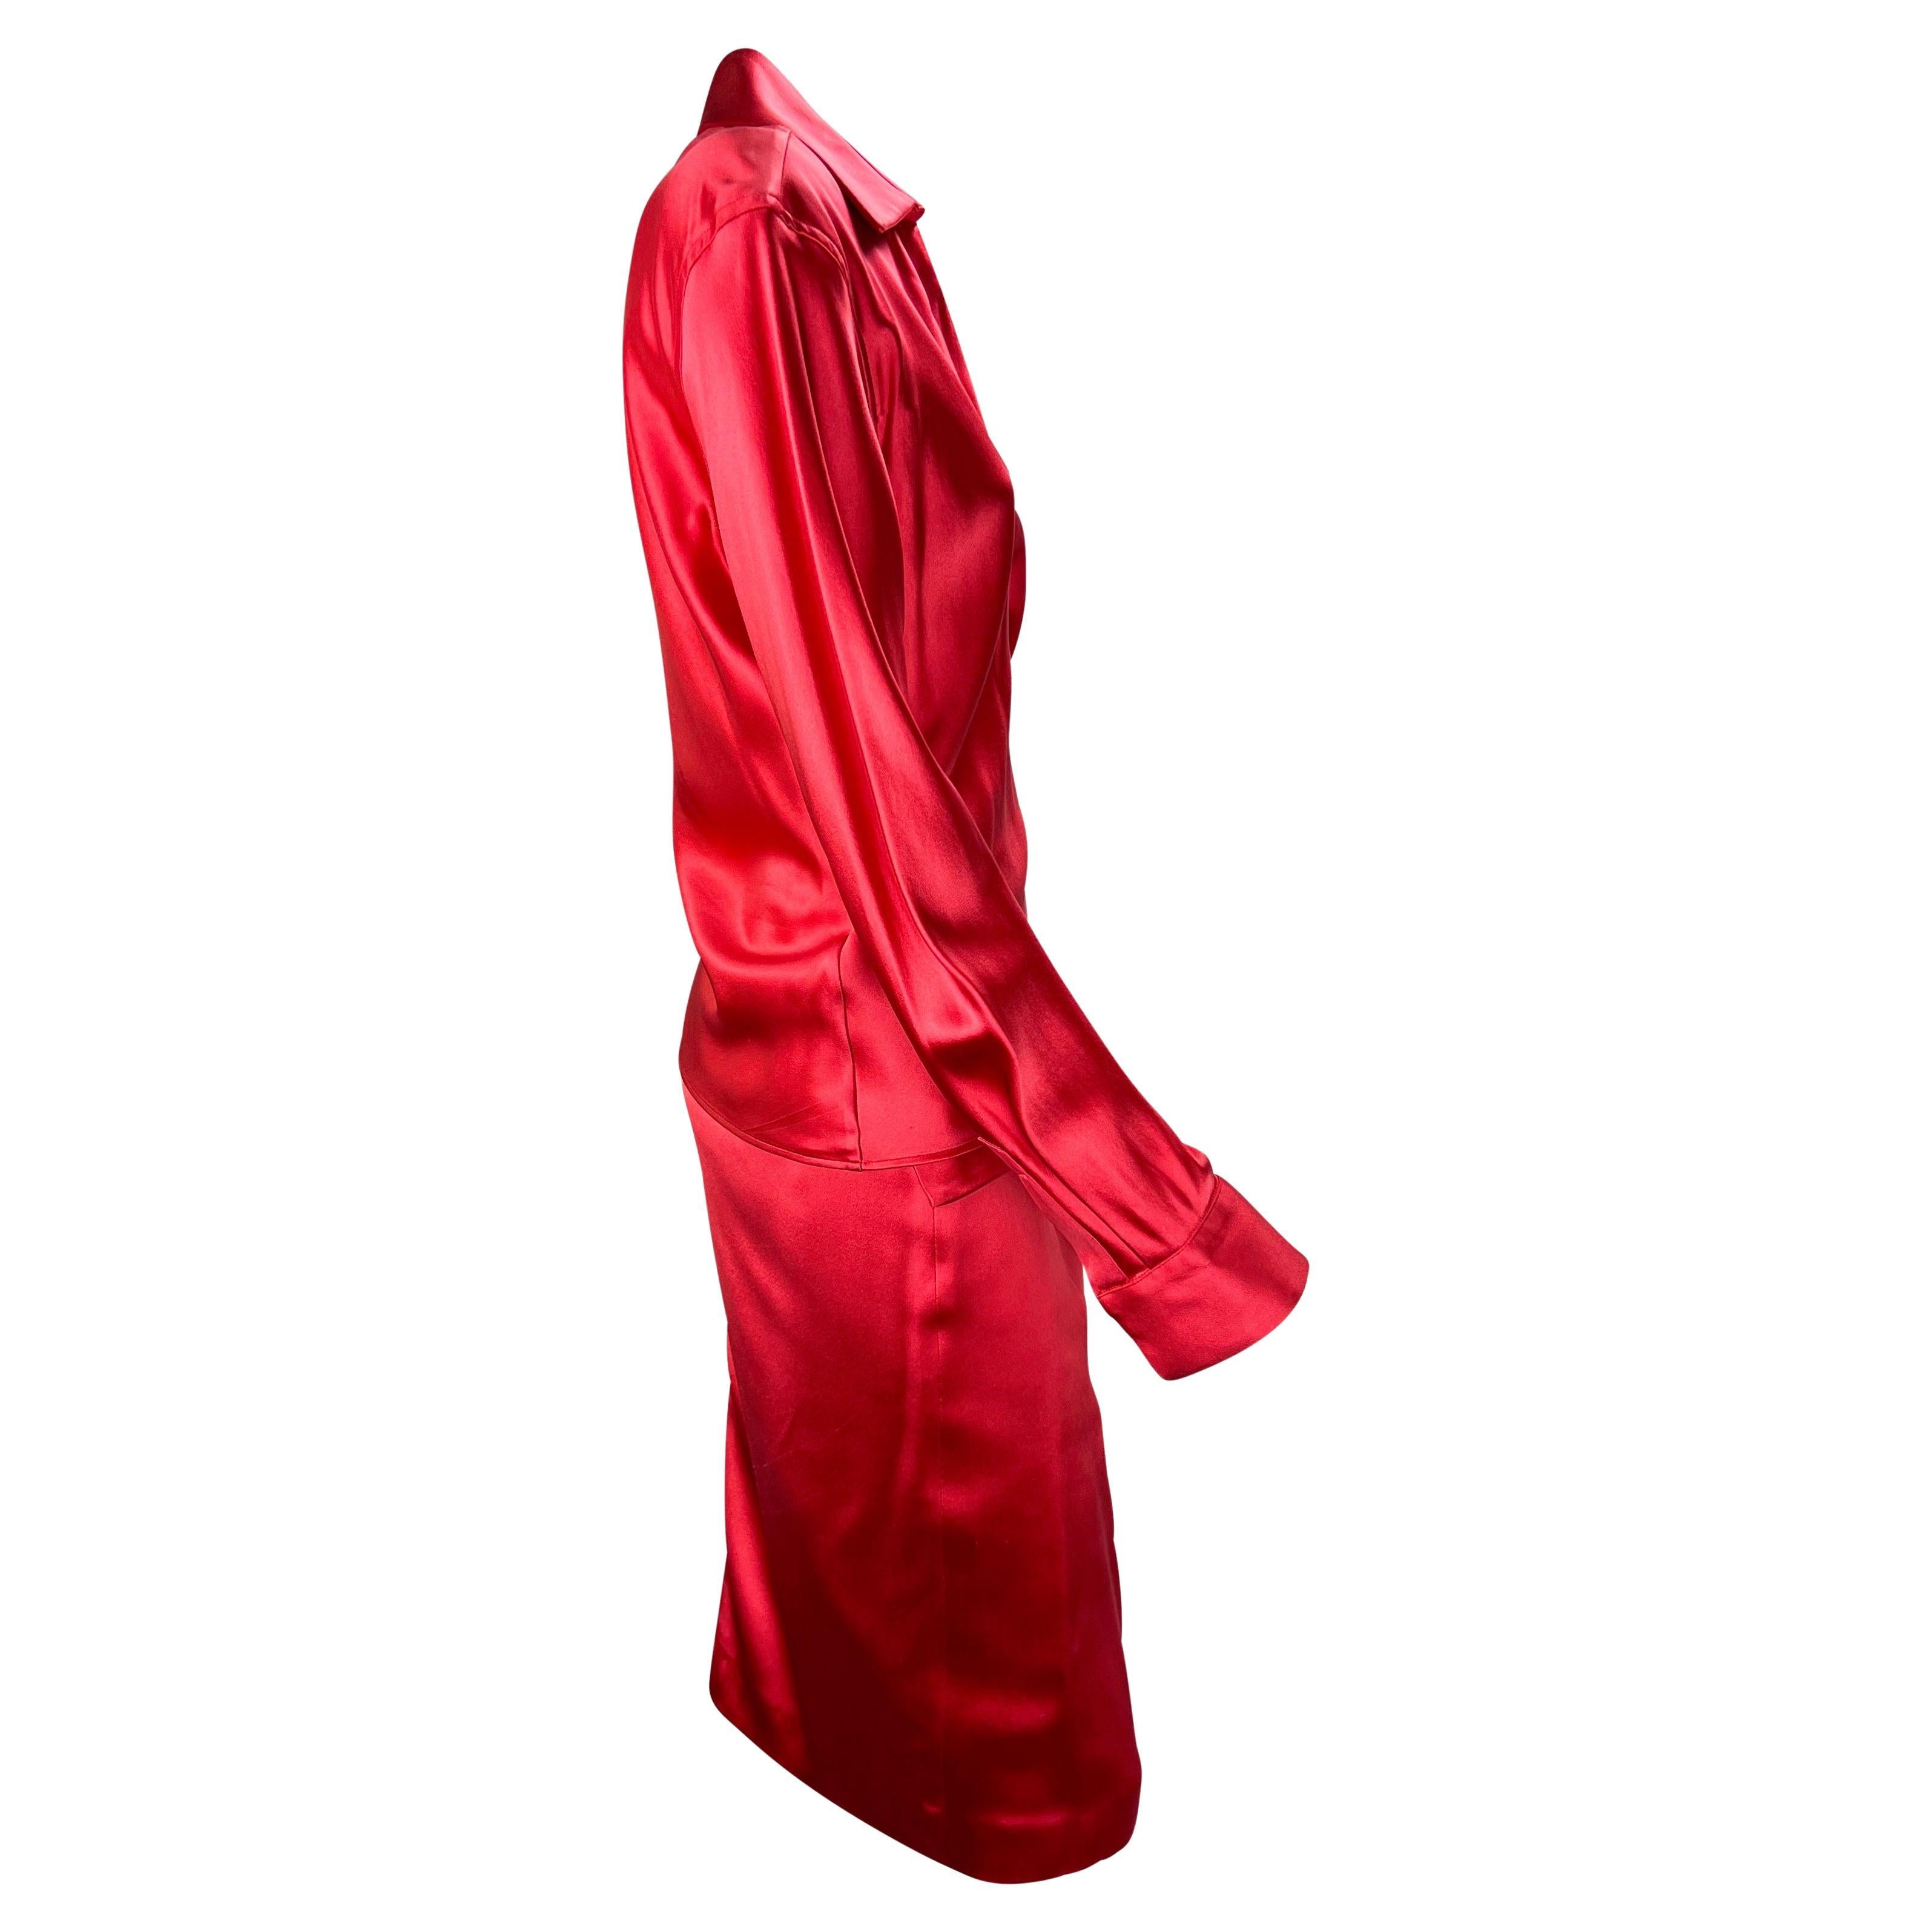 S/S 2001 Gucci by Tom Ford Red Plunging Satin Wrap Top Slit Skirt Set In Good Condition For Sale In West Hollywood, CA